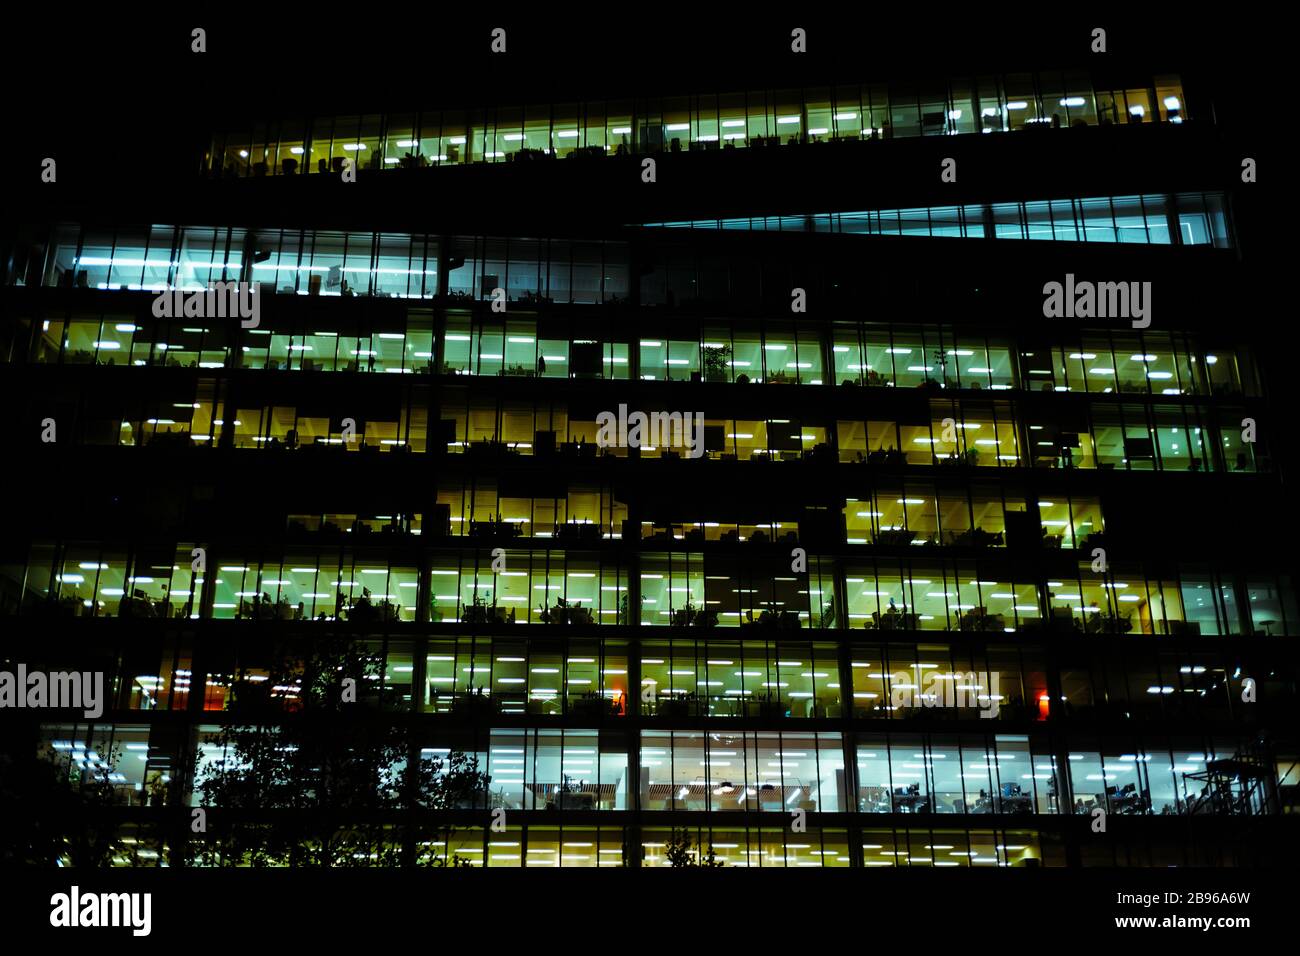 Colorful windows illuminated in a contemporary commercial building at night. Stock Photo